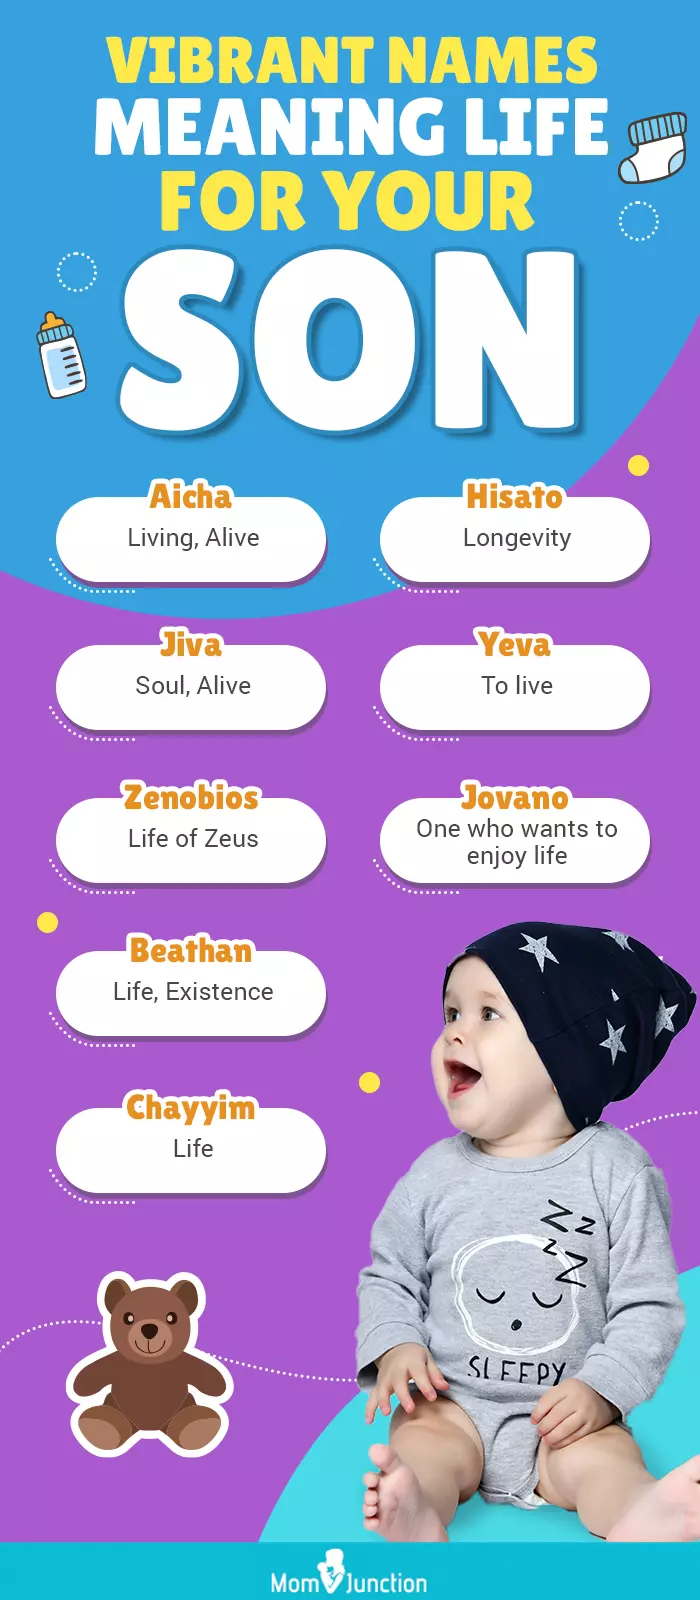 vibrant names meaning life for your son (infographic)